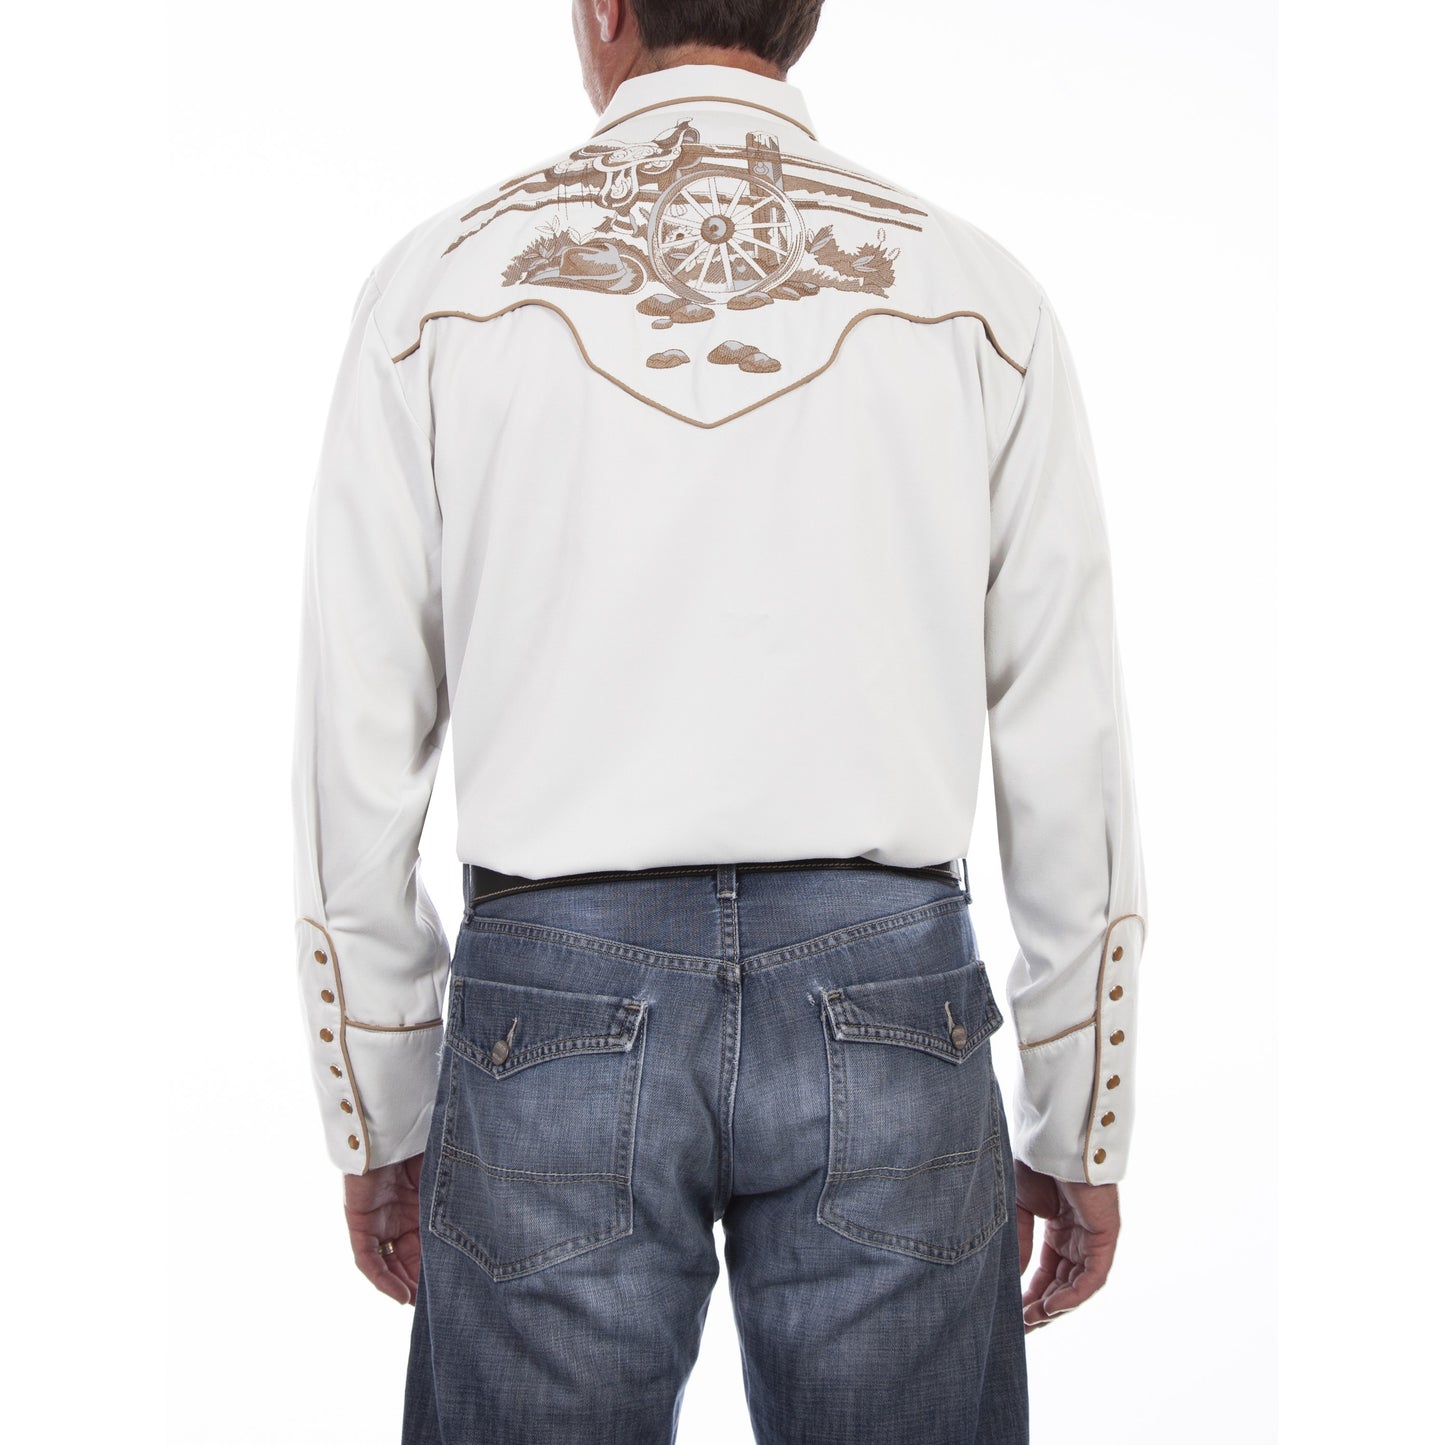 Scully Men's Wagon Wheel Western Embroidery White Stone Shirt P-902